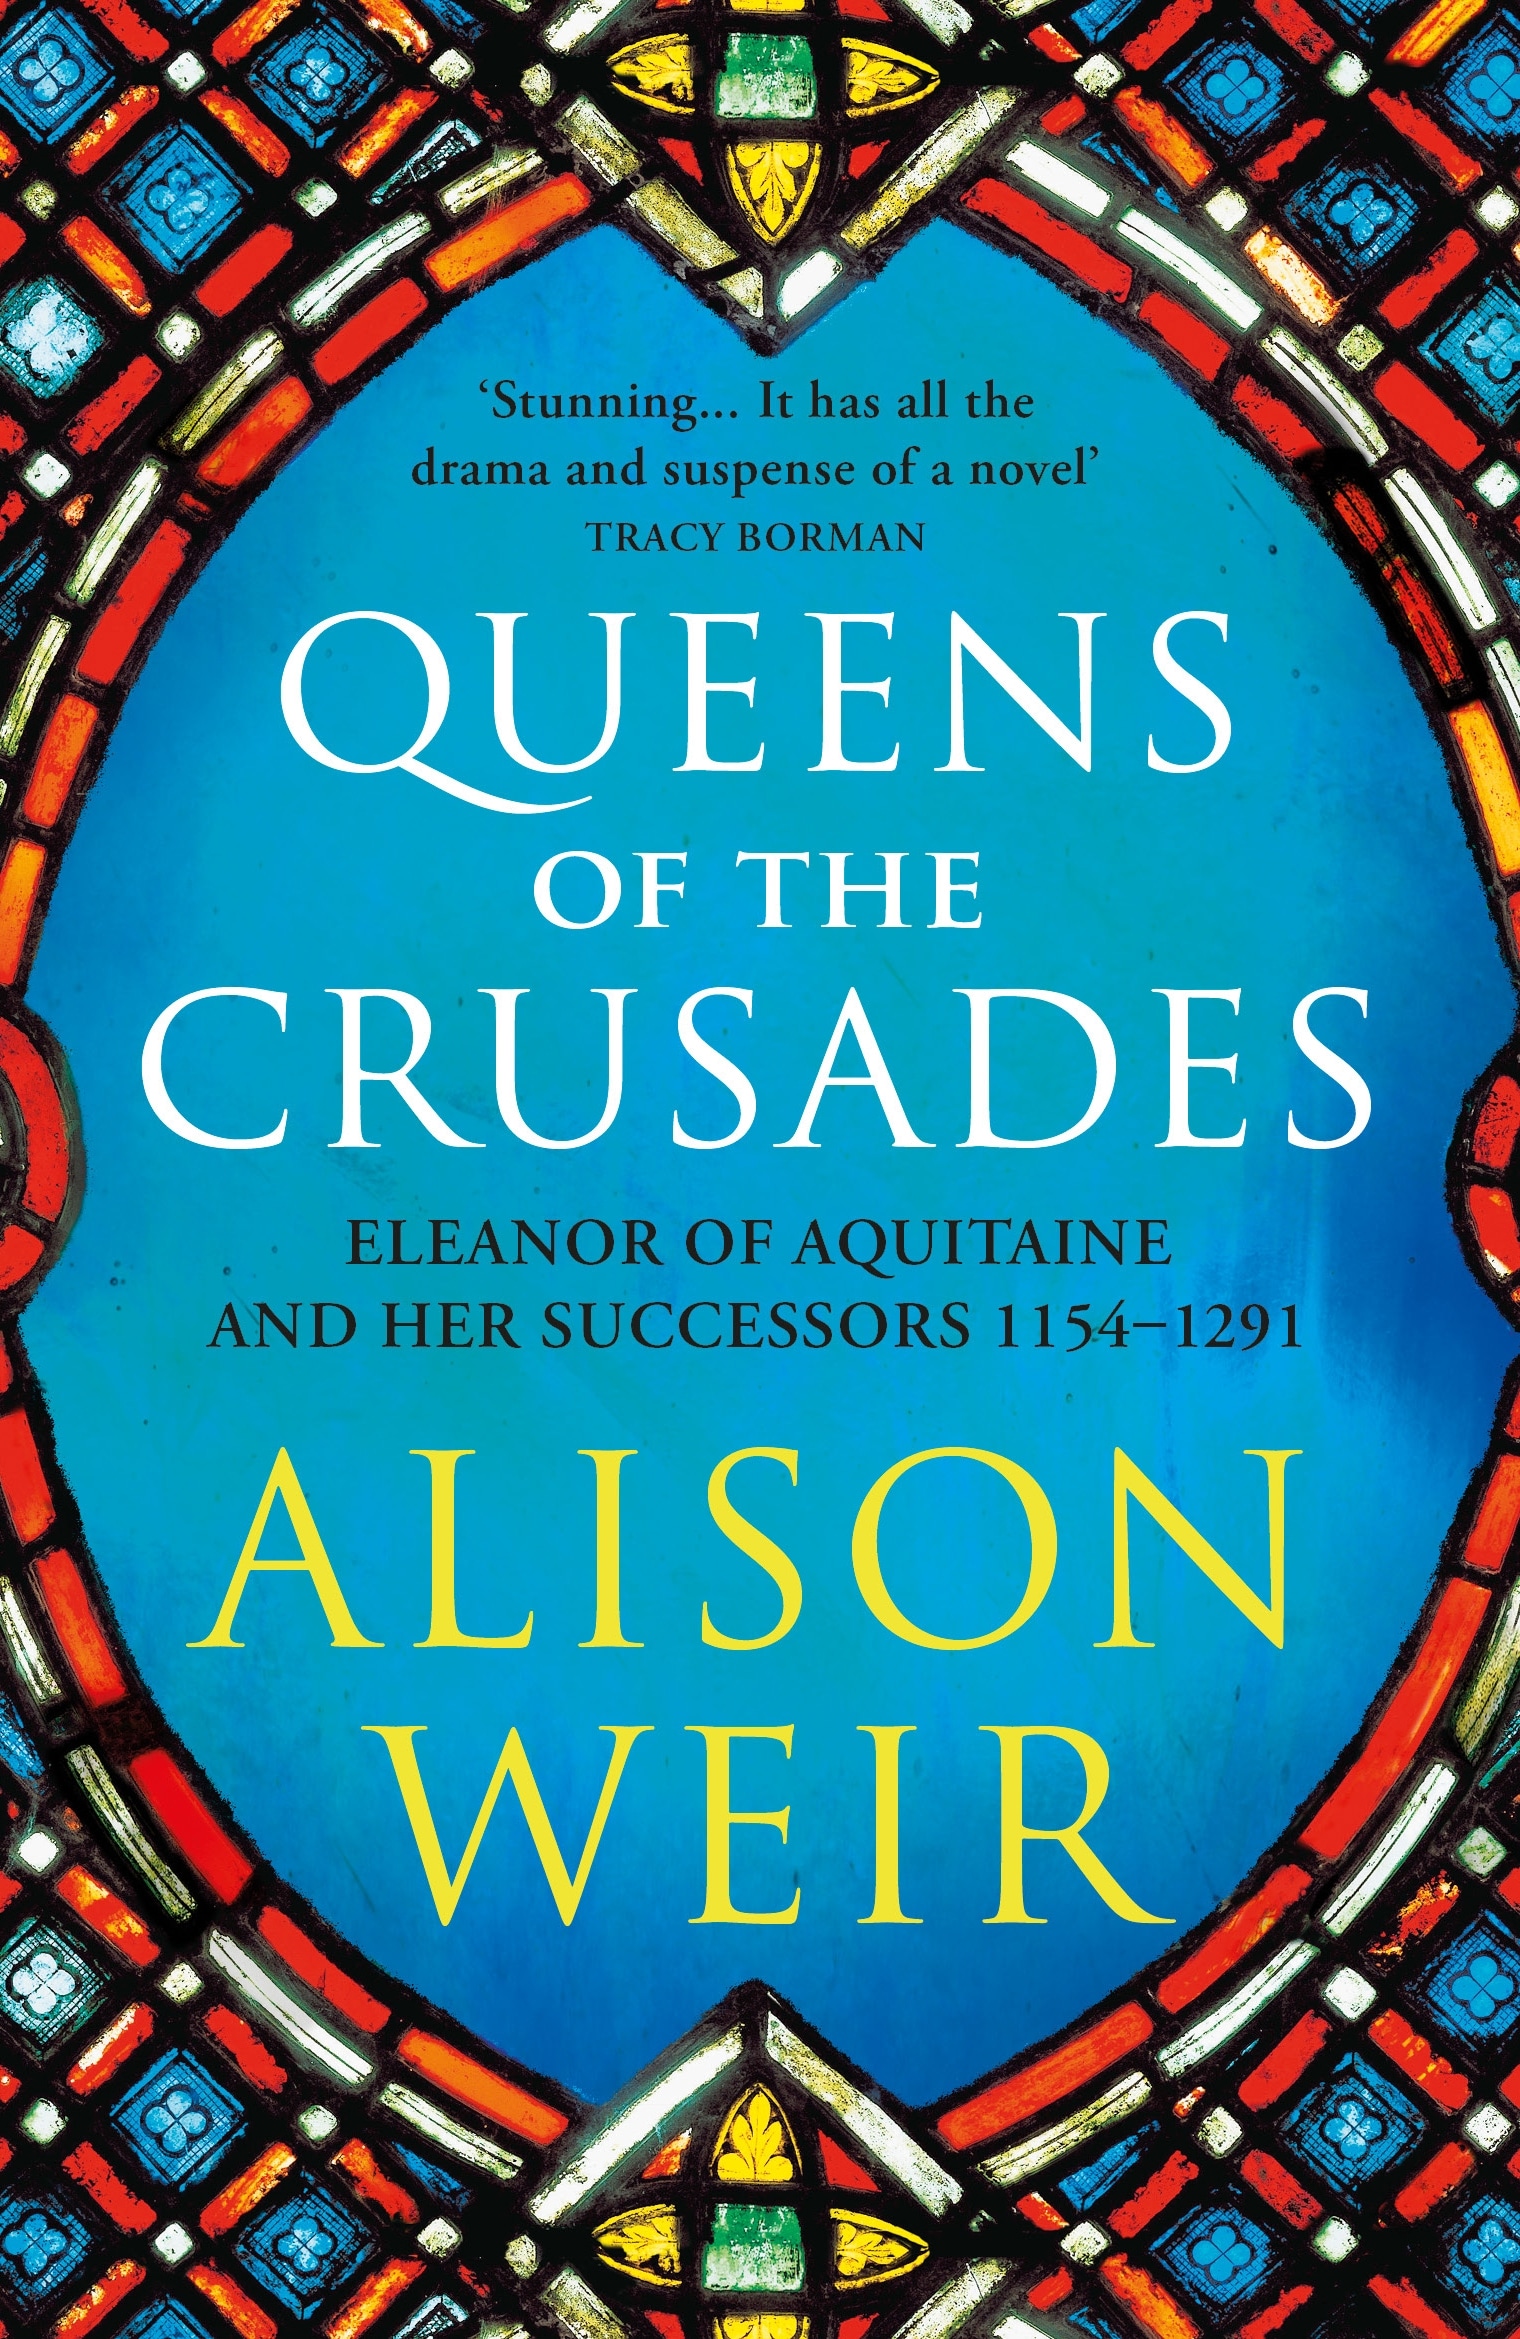 Book “Queens of the Crusades” by Alison Weir — October 21, 2021